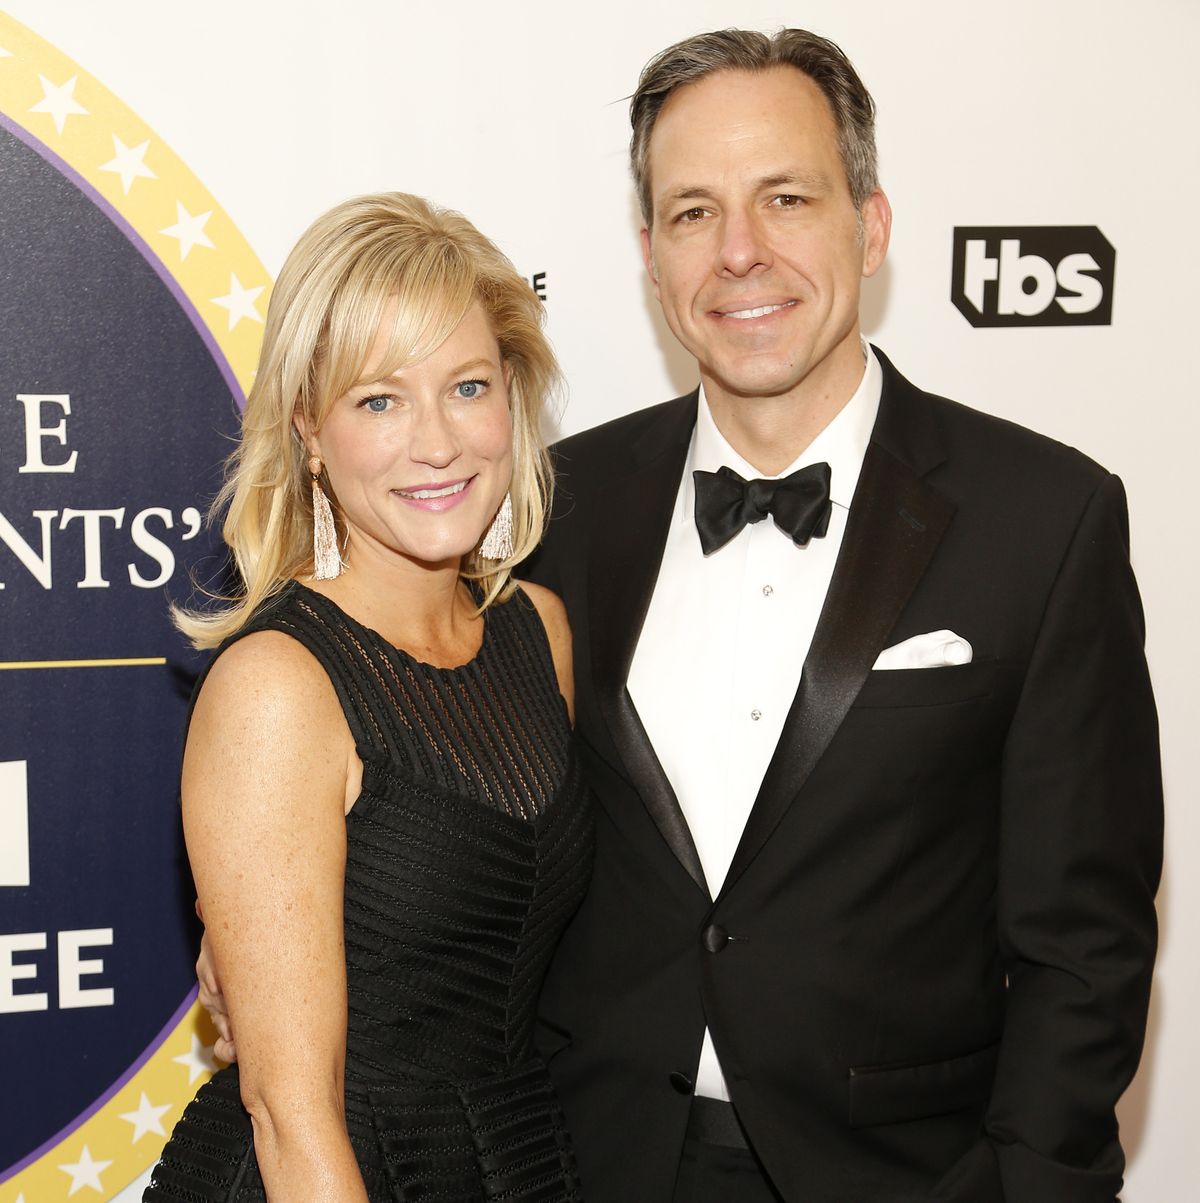 Jake Tapper and his wife, Jennifer